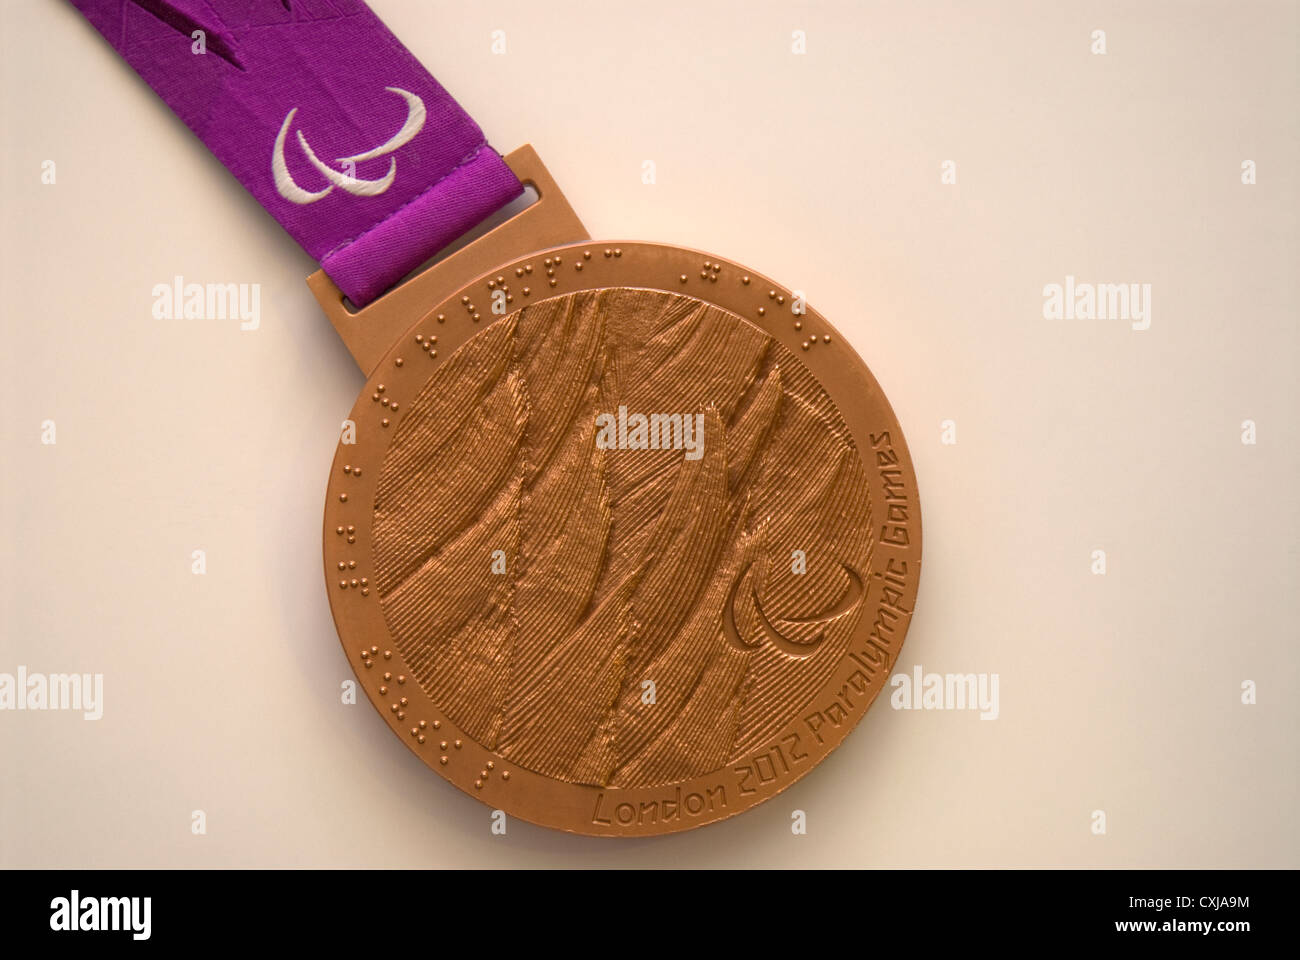 Bronze medal won at London 2012 Paralympic Games by Olivia Breen. Stock Photo